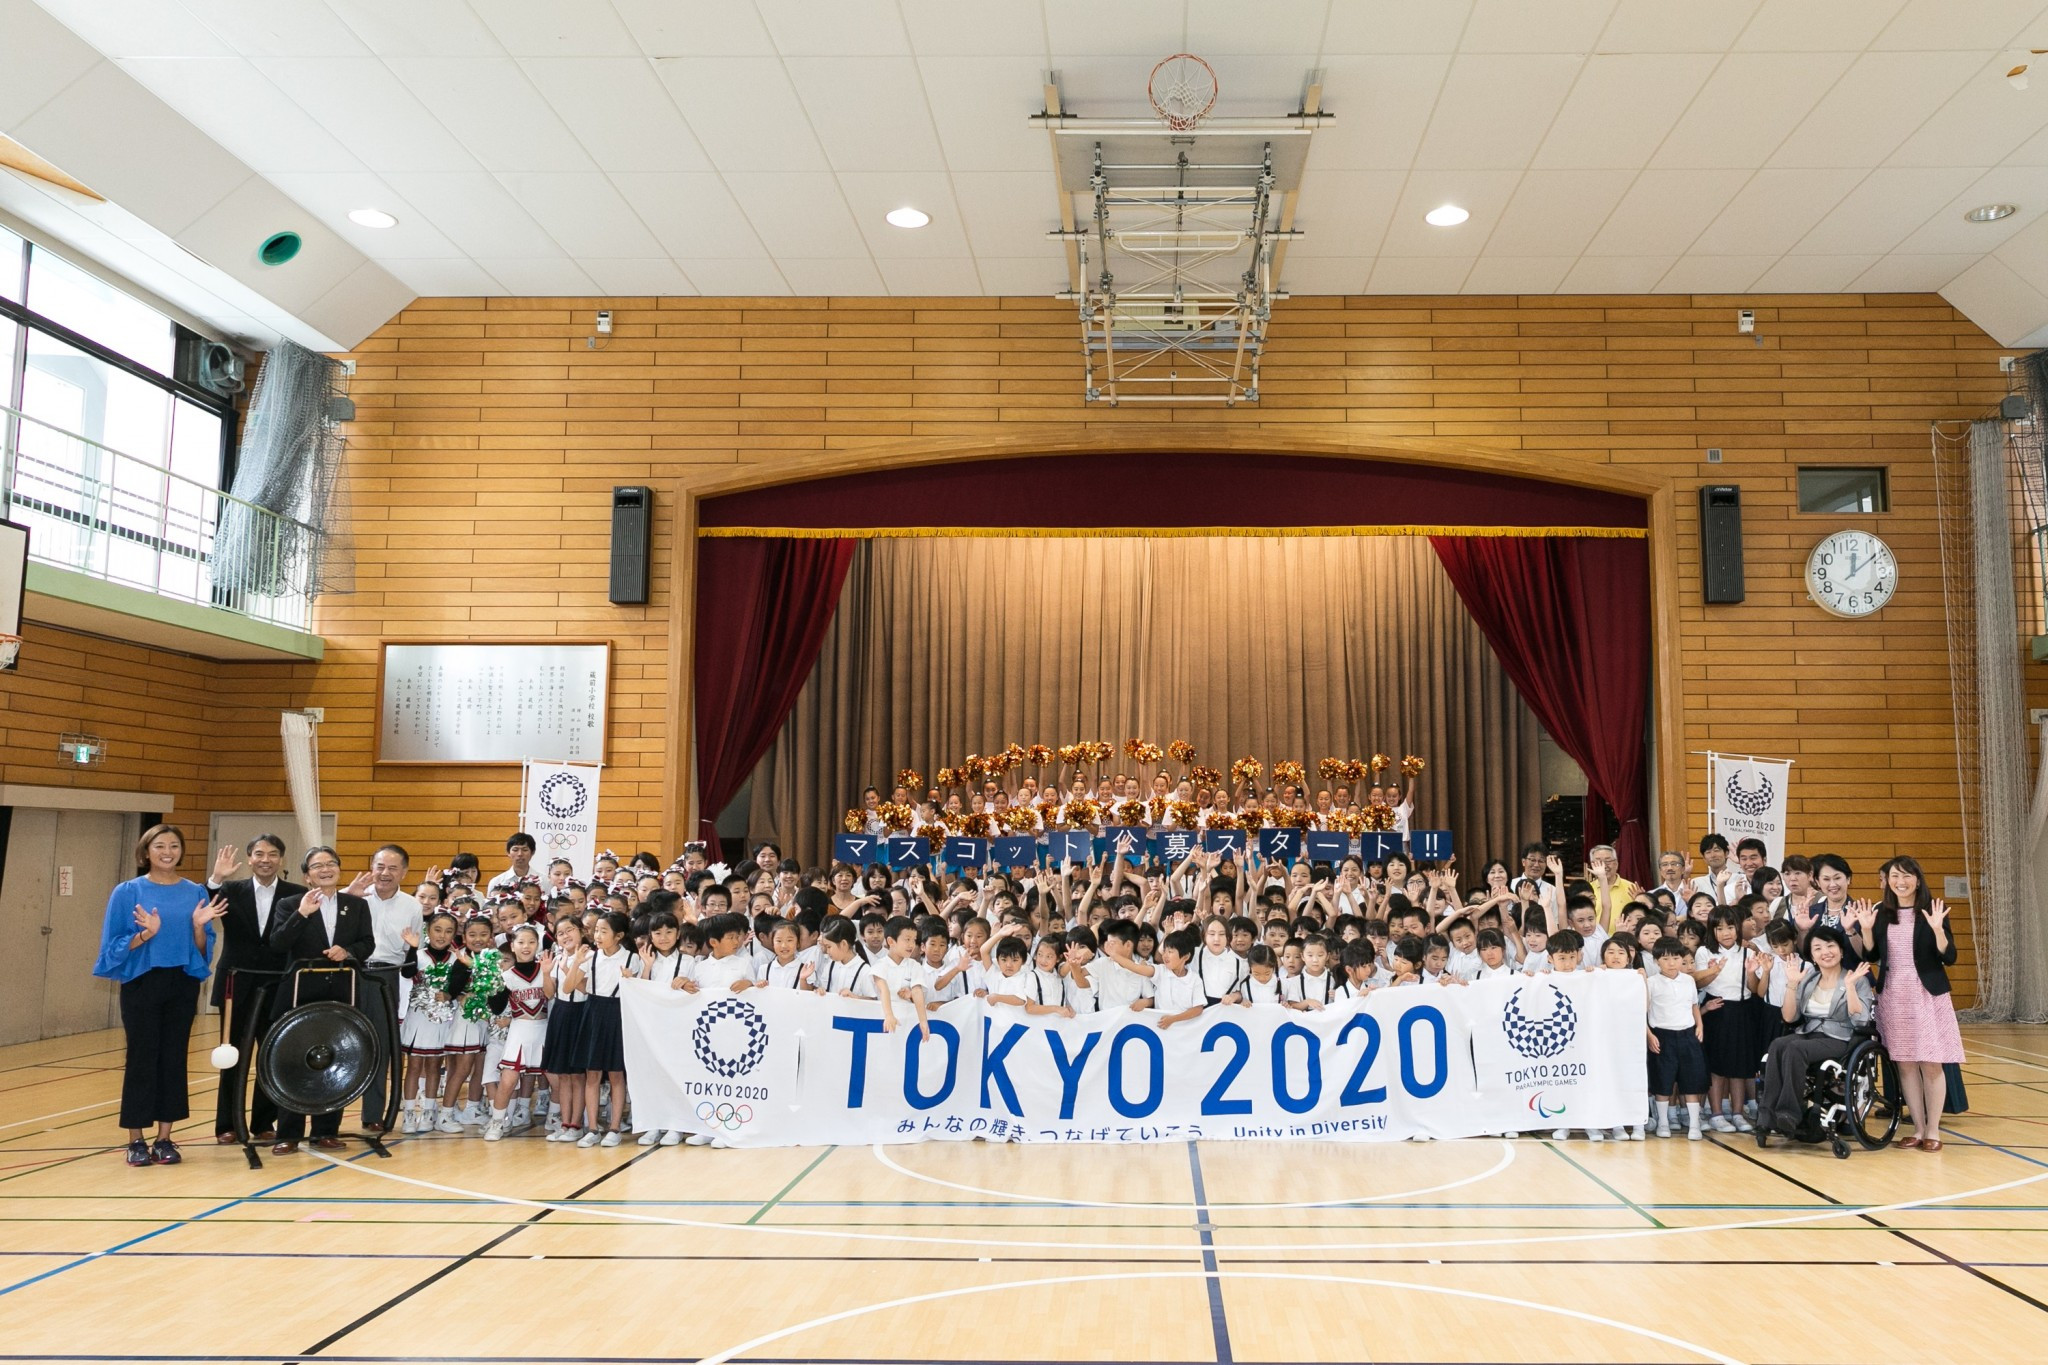 Entries can be submitted until the closing date on August 14 ©Tokyo 2020/Uta Mukuo